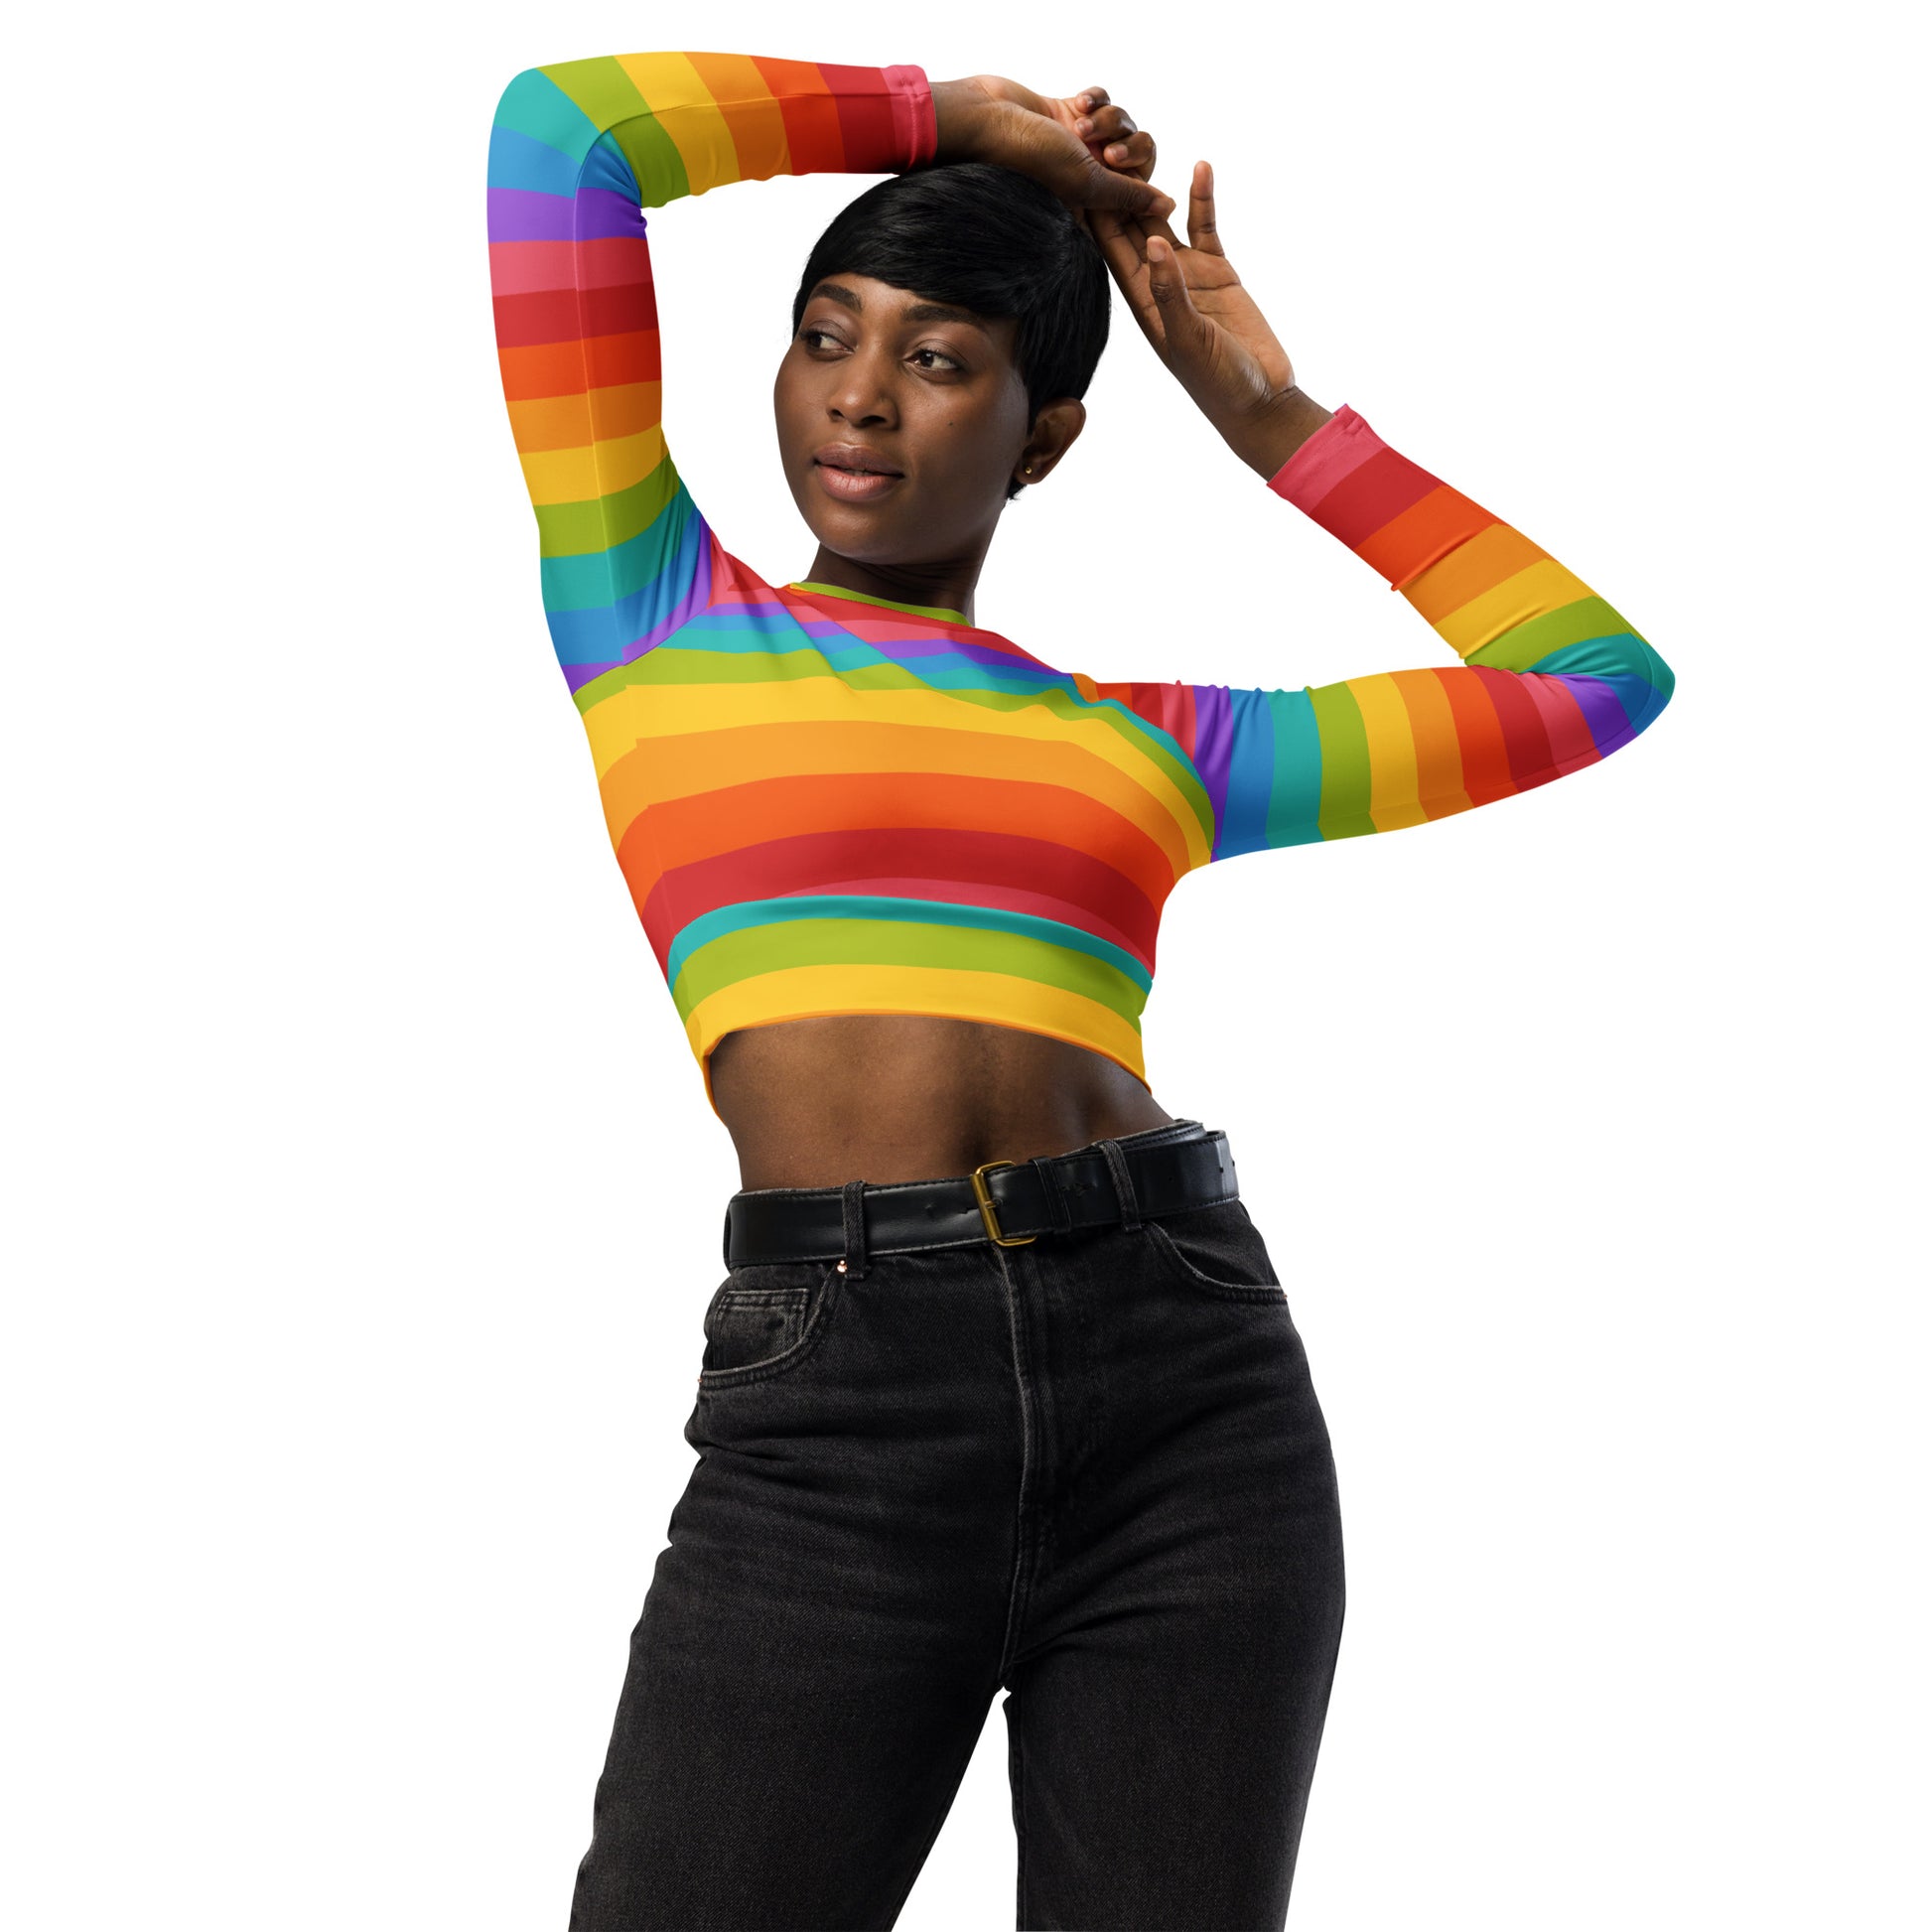 Rainbow Long Sleeve Crop Top Shirt, Striped Recycled Fitted Tee Women Adult Cute Aesthetic Graphic Rash Guard Plus Size Crewneck Starcove Fashion